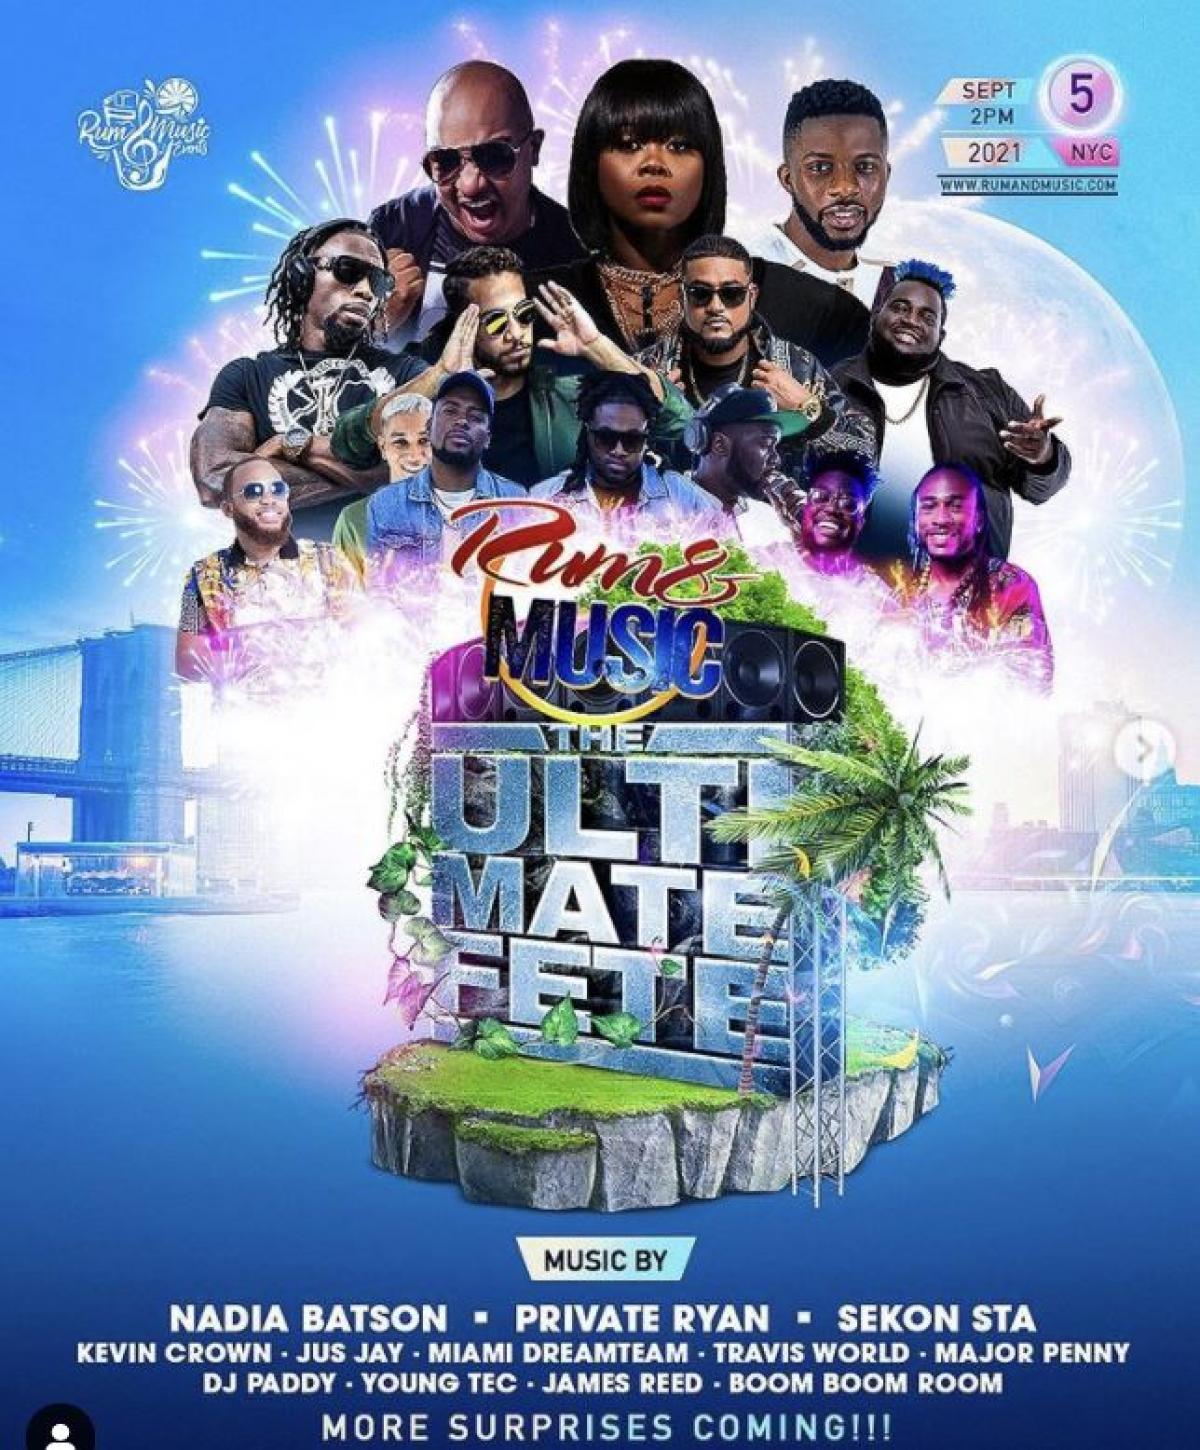  Rum and Music : The Ultimate Fete flyer or graphic.